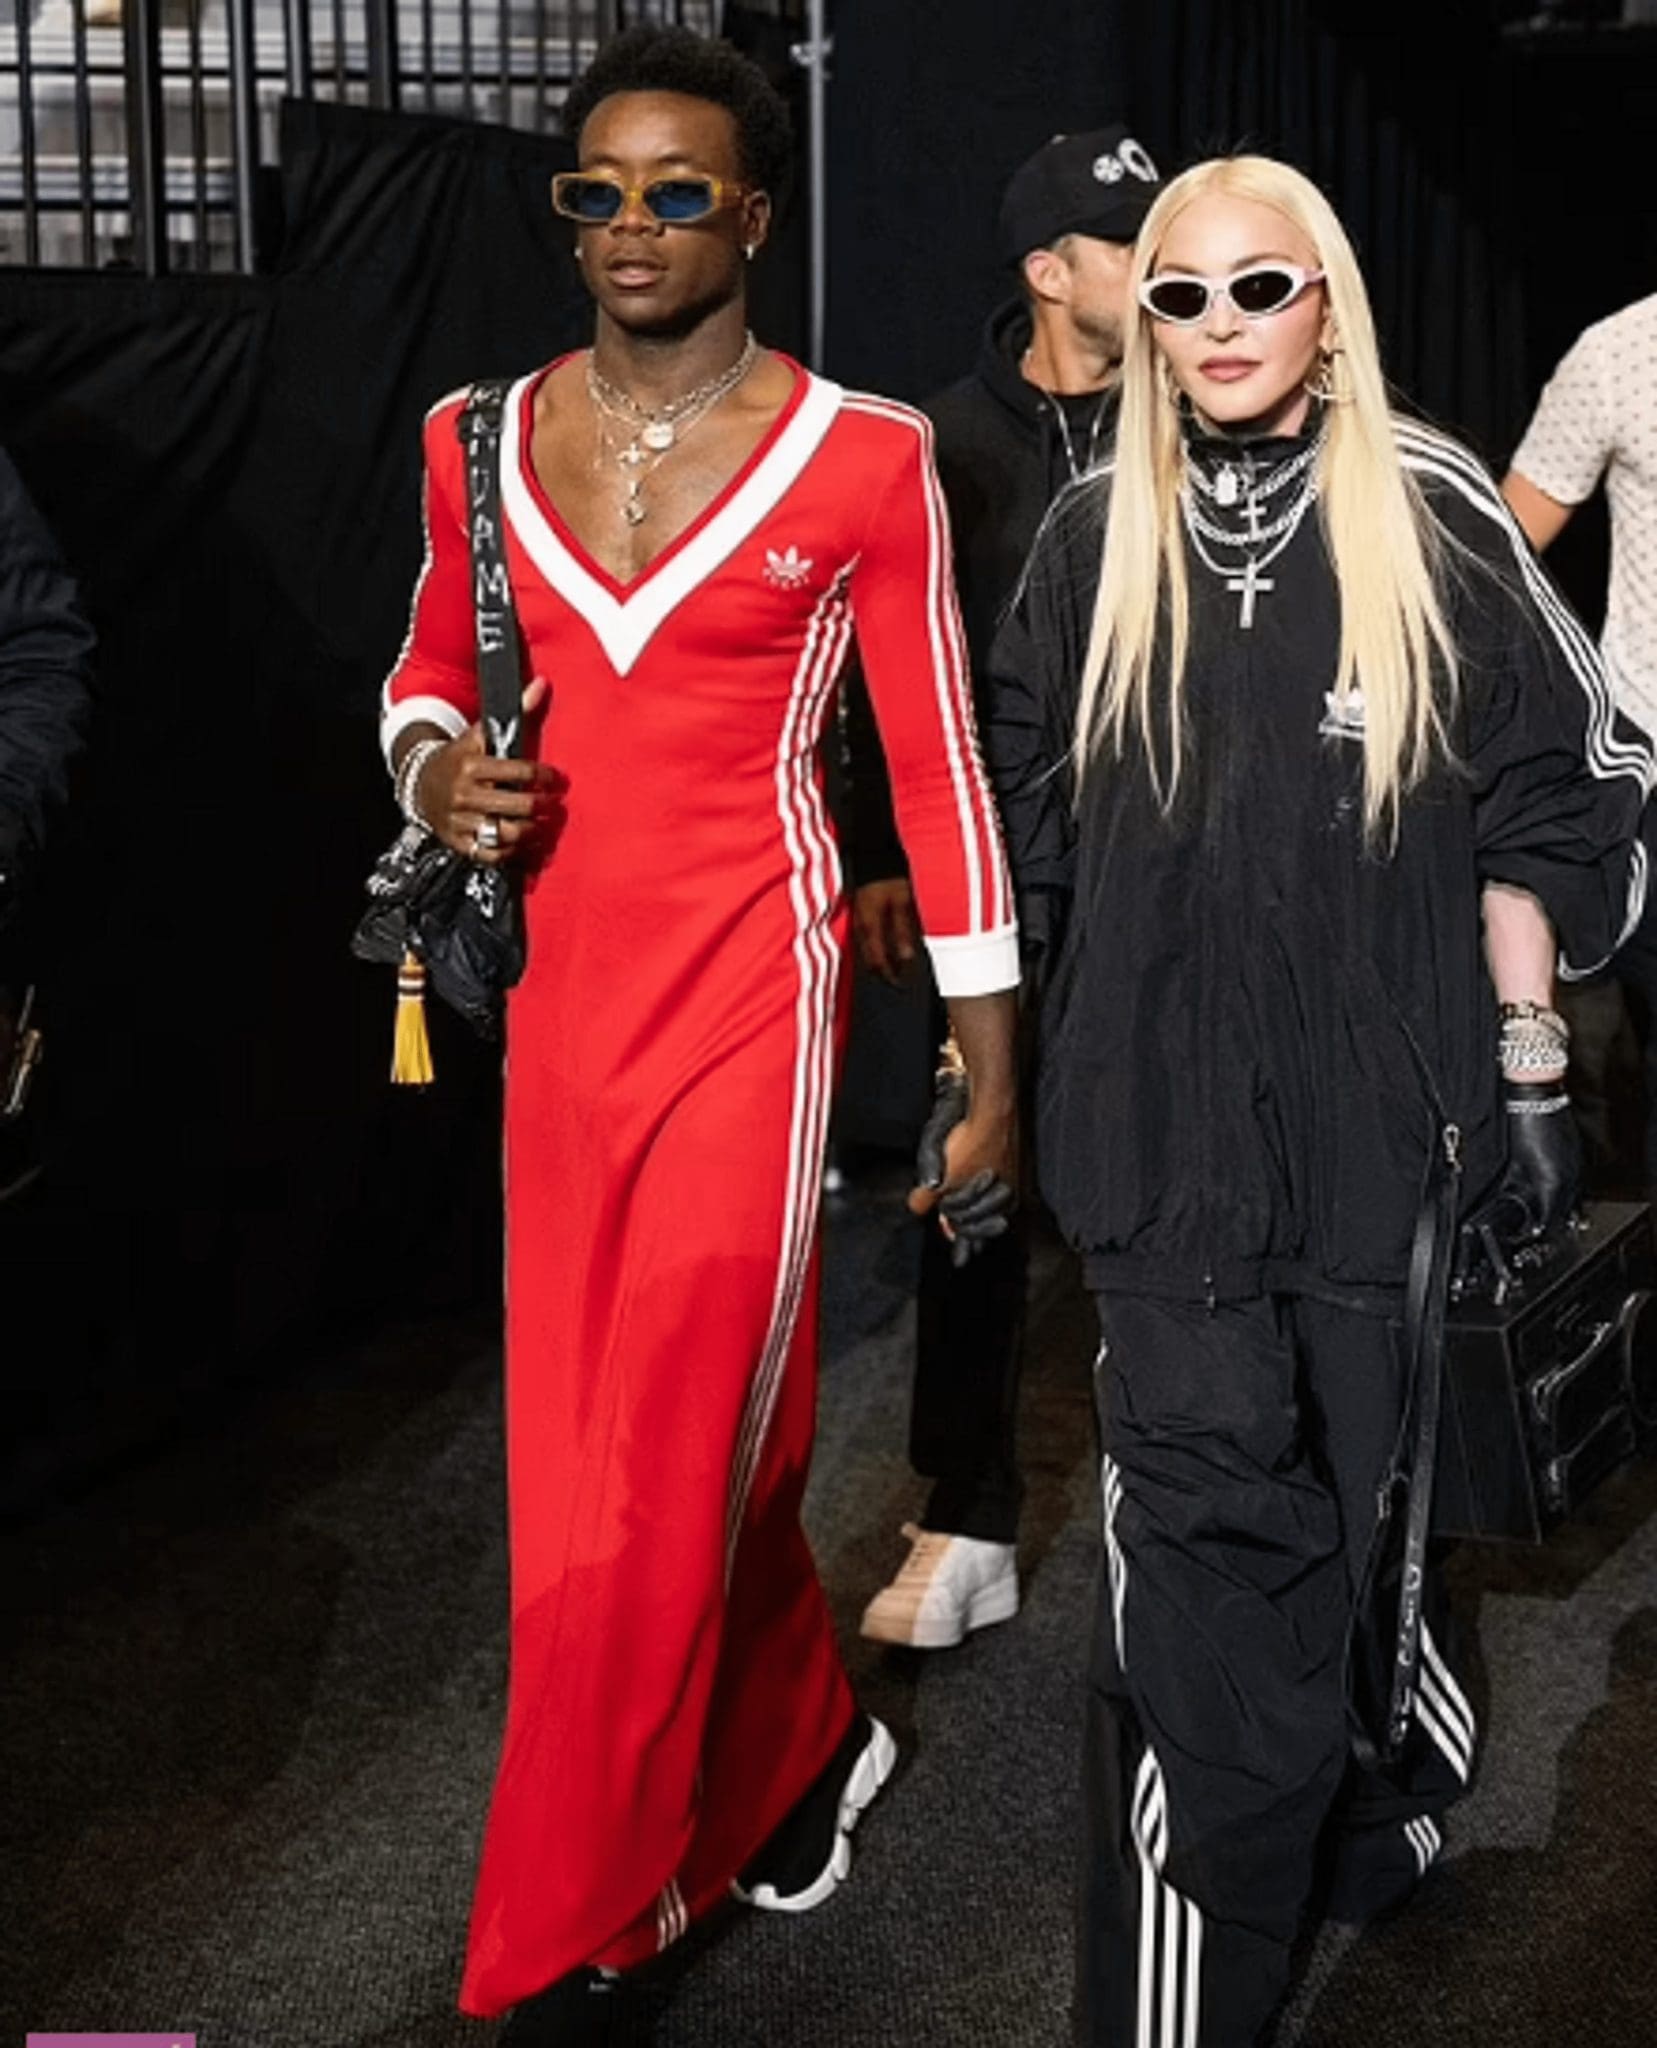 Madonna's son wears a tight red Adidas x Gucci dress to a boxing competition